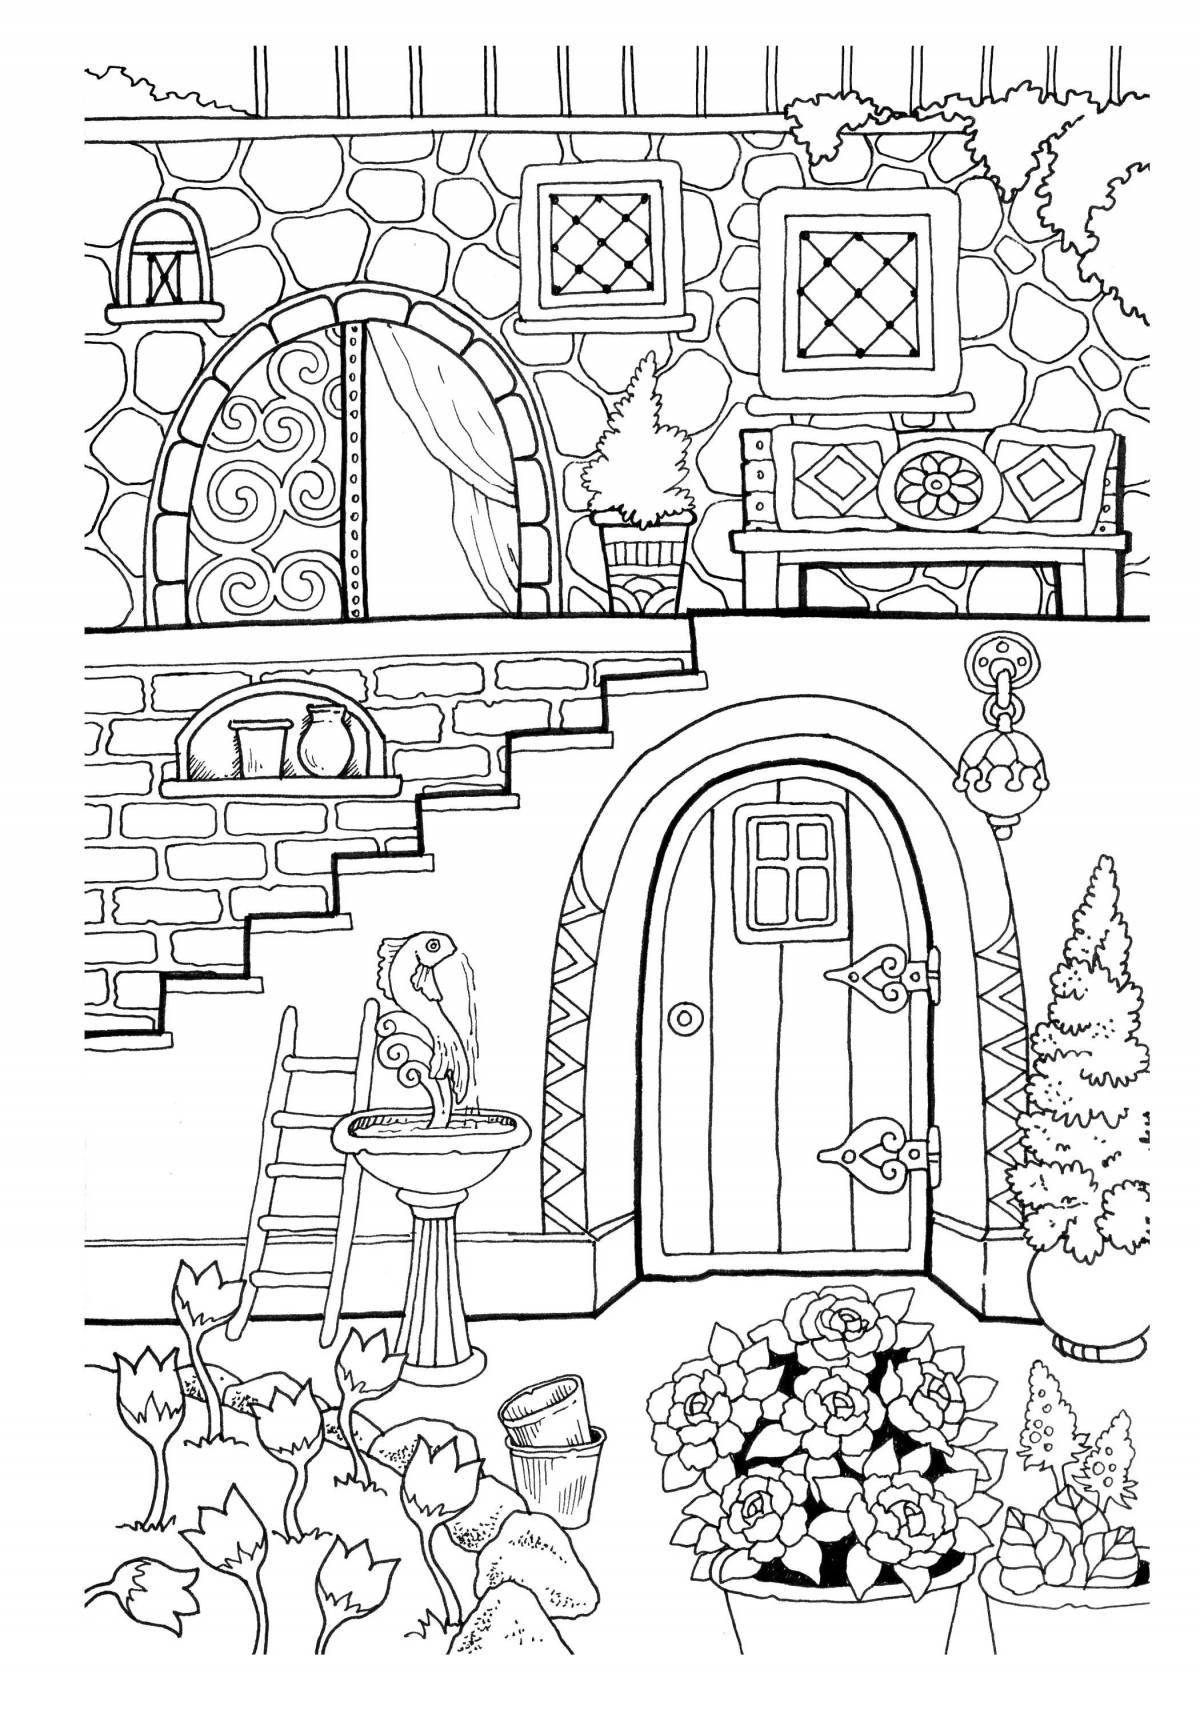 Fun coloring inside the house